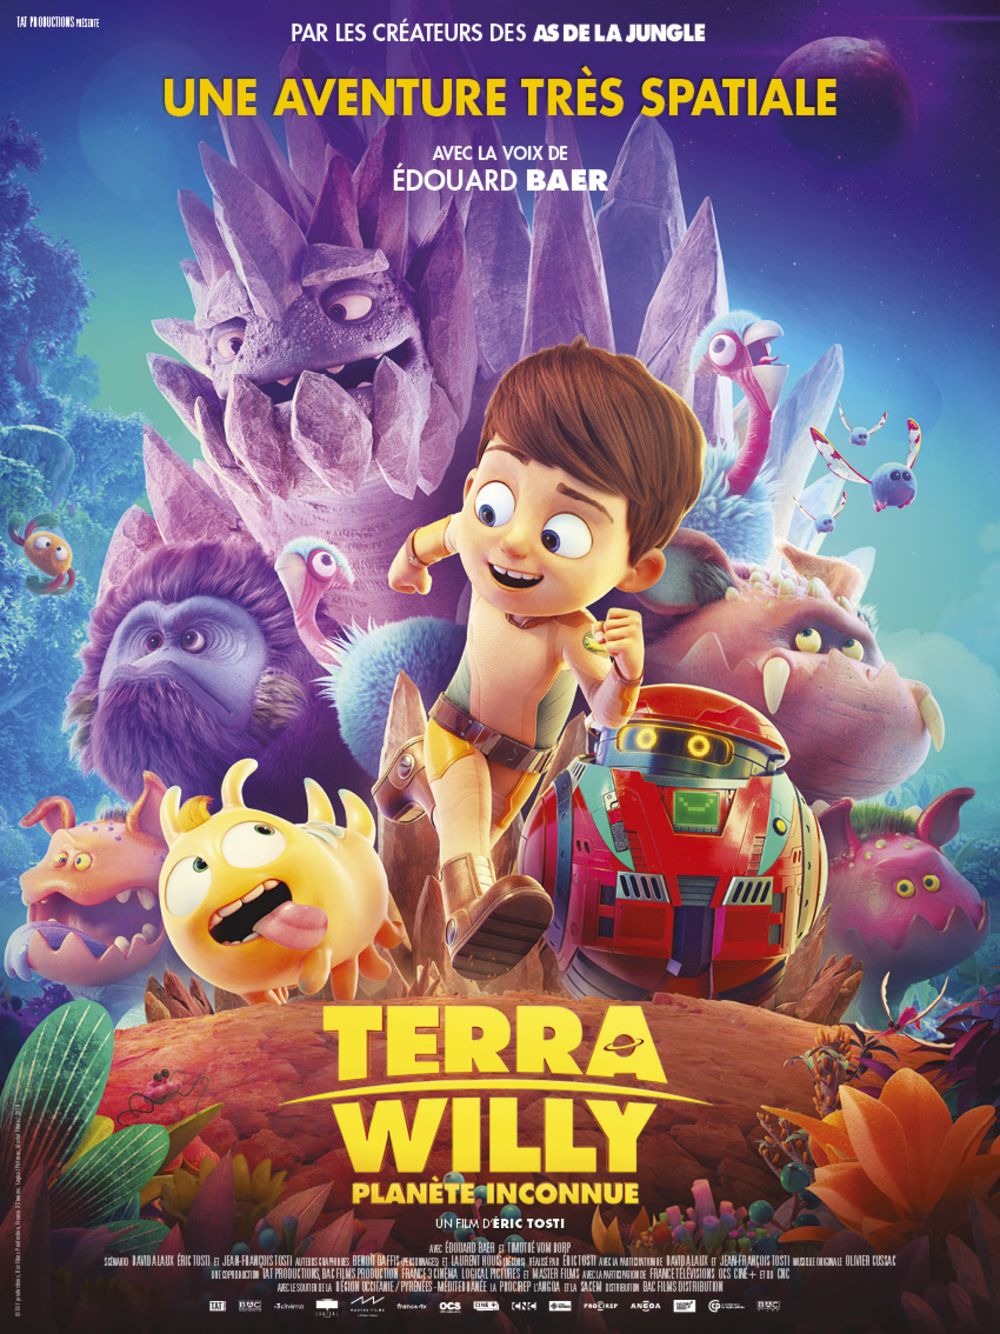 Extra Large Movie Poster Image for Terra Willy: Planète inconnue (#1 of 2)